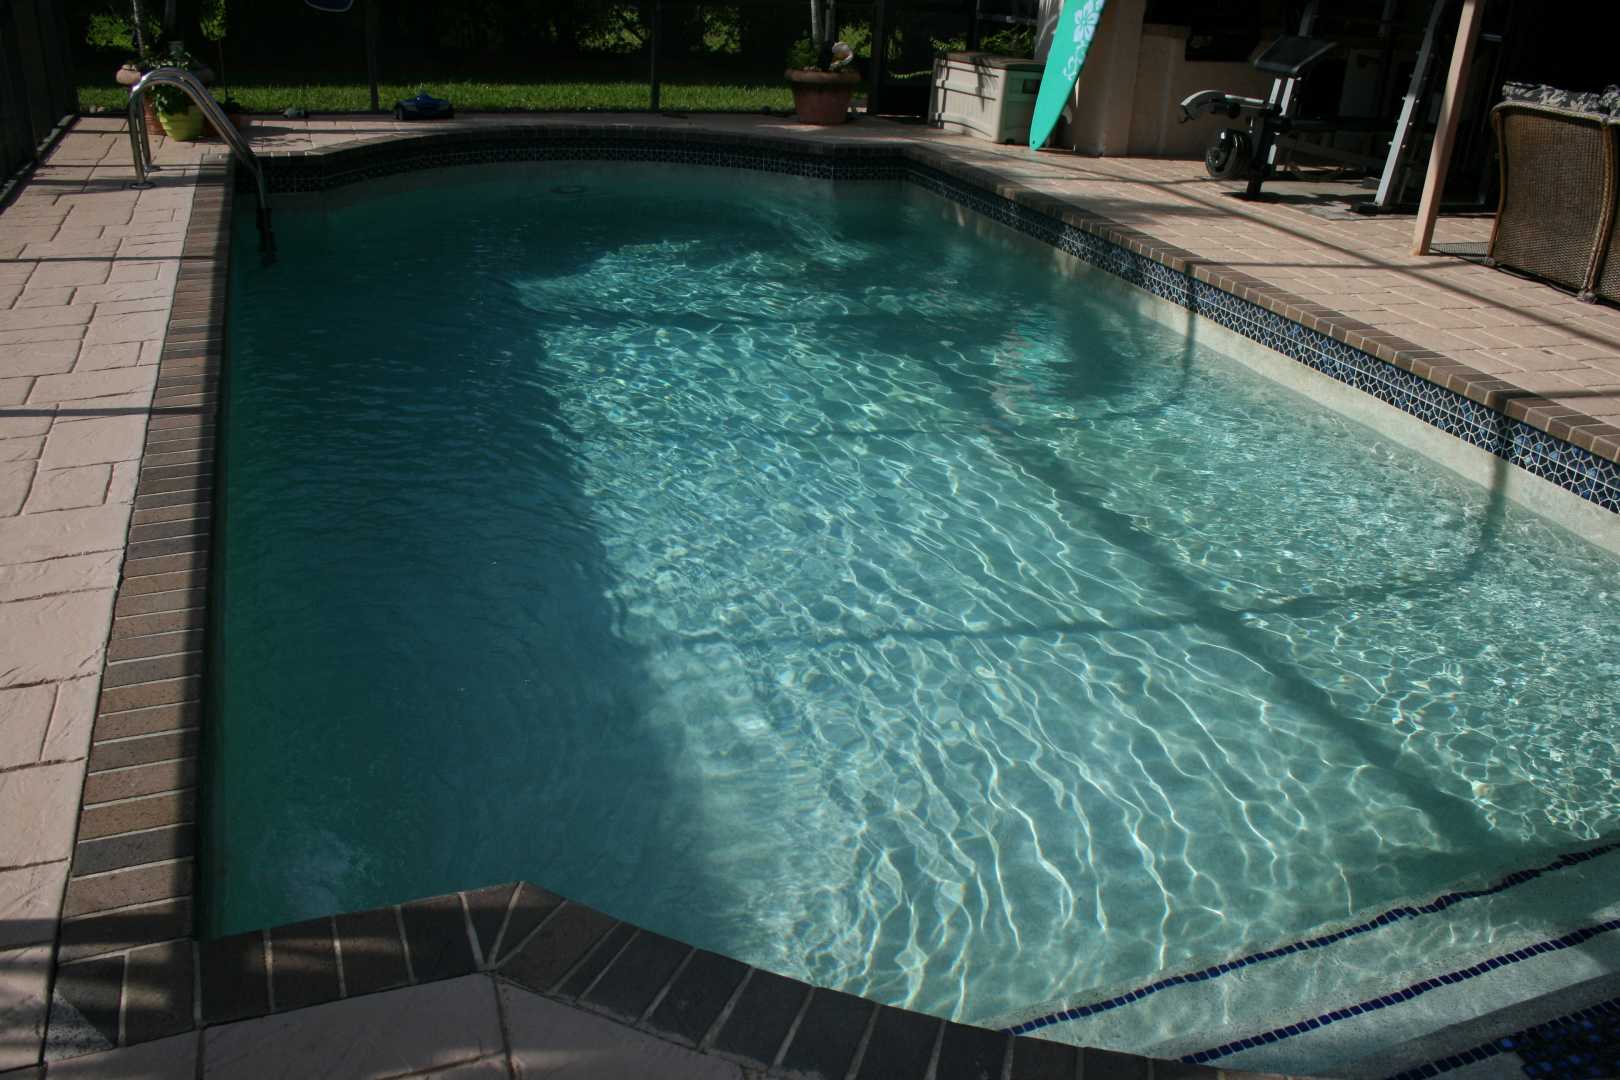 Pool with a Leak